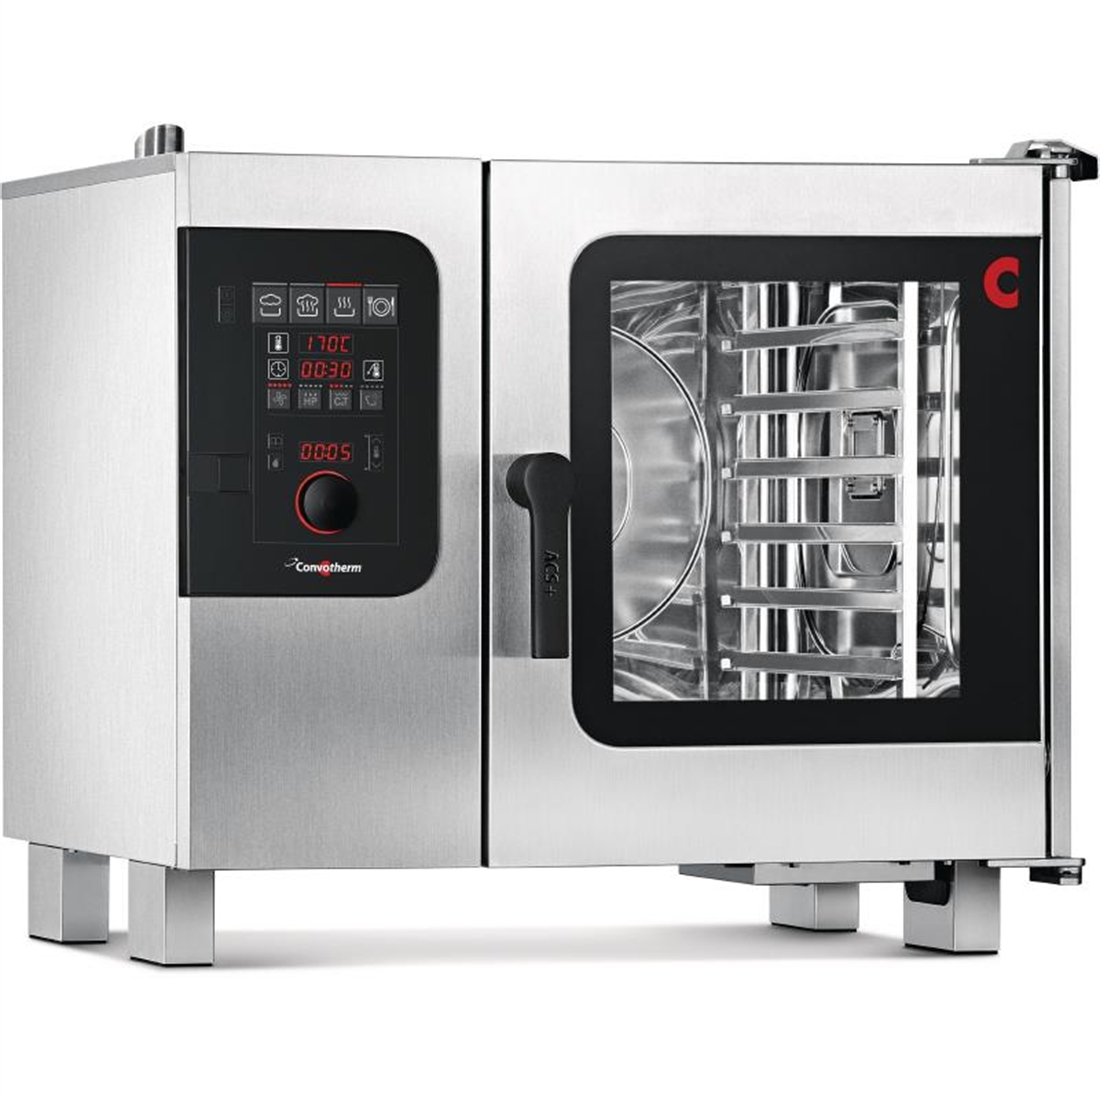 Convotherm 4 easyDial Combi Oven 6 x 1 x1 GN Grid with ConvoGrill and Install